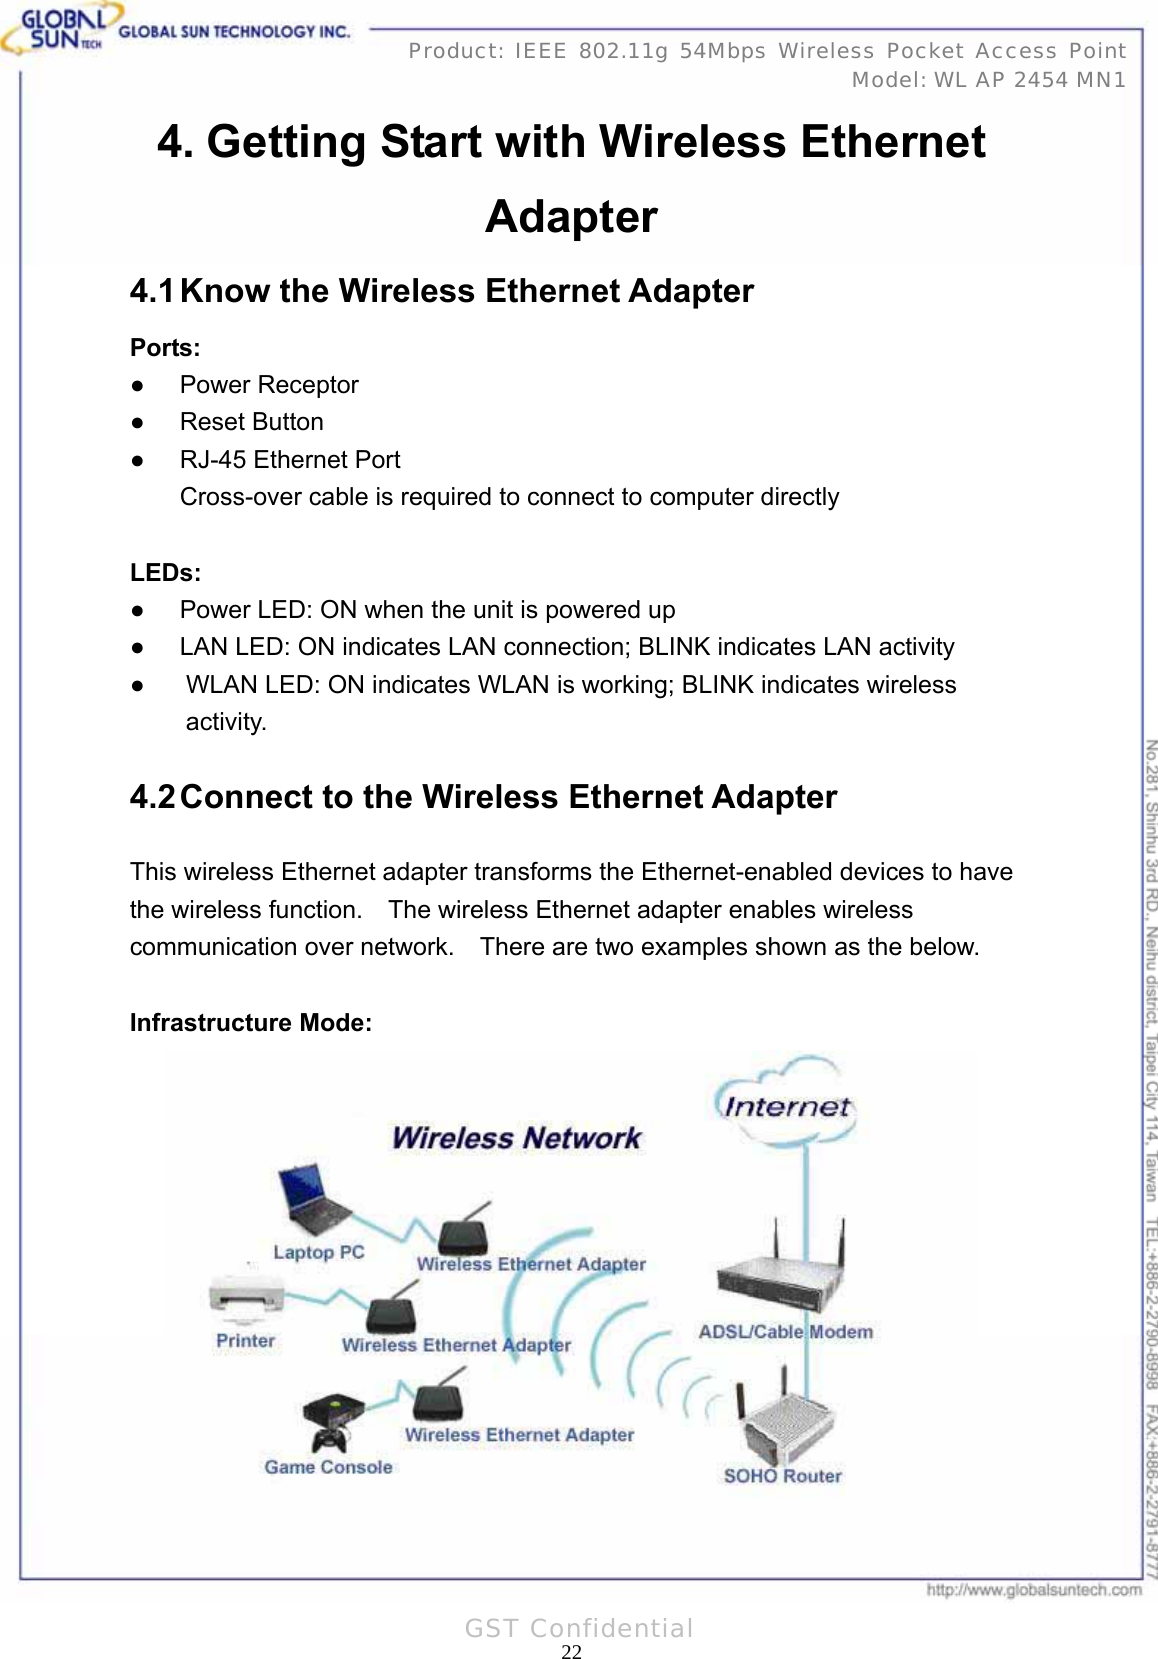   22Product: IEEE 802.11g 54Mbps Wireless Pocket Access Point Model: WL AP 2454 MN1GST Confidential 4. Getting Start with Wireless Ethernet Adapter 4.1 Know the Wireless Ethernet Adapter Ports: ● Power Receptor ● Reset Button ●  RJ-45 Ethernet Port Cross-over cable is required to connect to computer directly  LEDs: ●  Power LED: ON when the unit is powered up ●  LAN LED: ON indicates LAN connection; BLINK indicates LAN activity ●  WLAN LED: ON indicates WLAN is working; BLINK indicates wireless activity. 4.2 Connect to the Wireless Ethernet Adapter This wireless Ethernet adapter transforms the Ethernet-enabled devices to have the wireless function.    The wireless Ethernet adapter enables wireless communication over network.    There are two examples shown as the below.  Infrastructure Mode:  